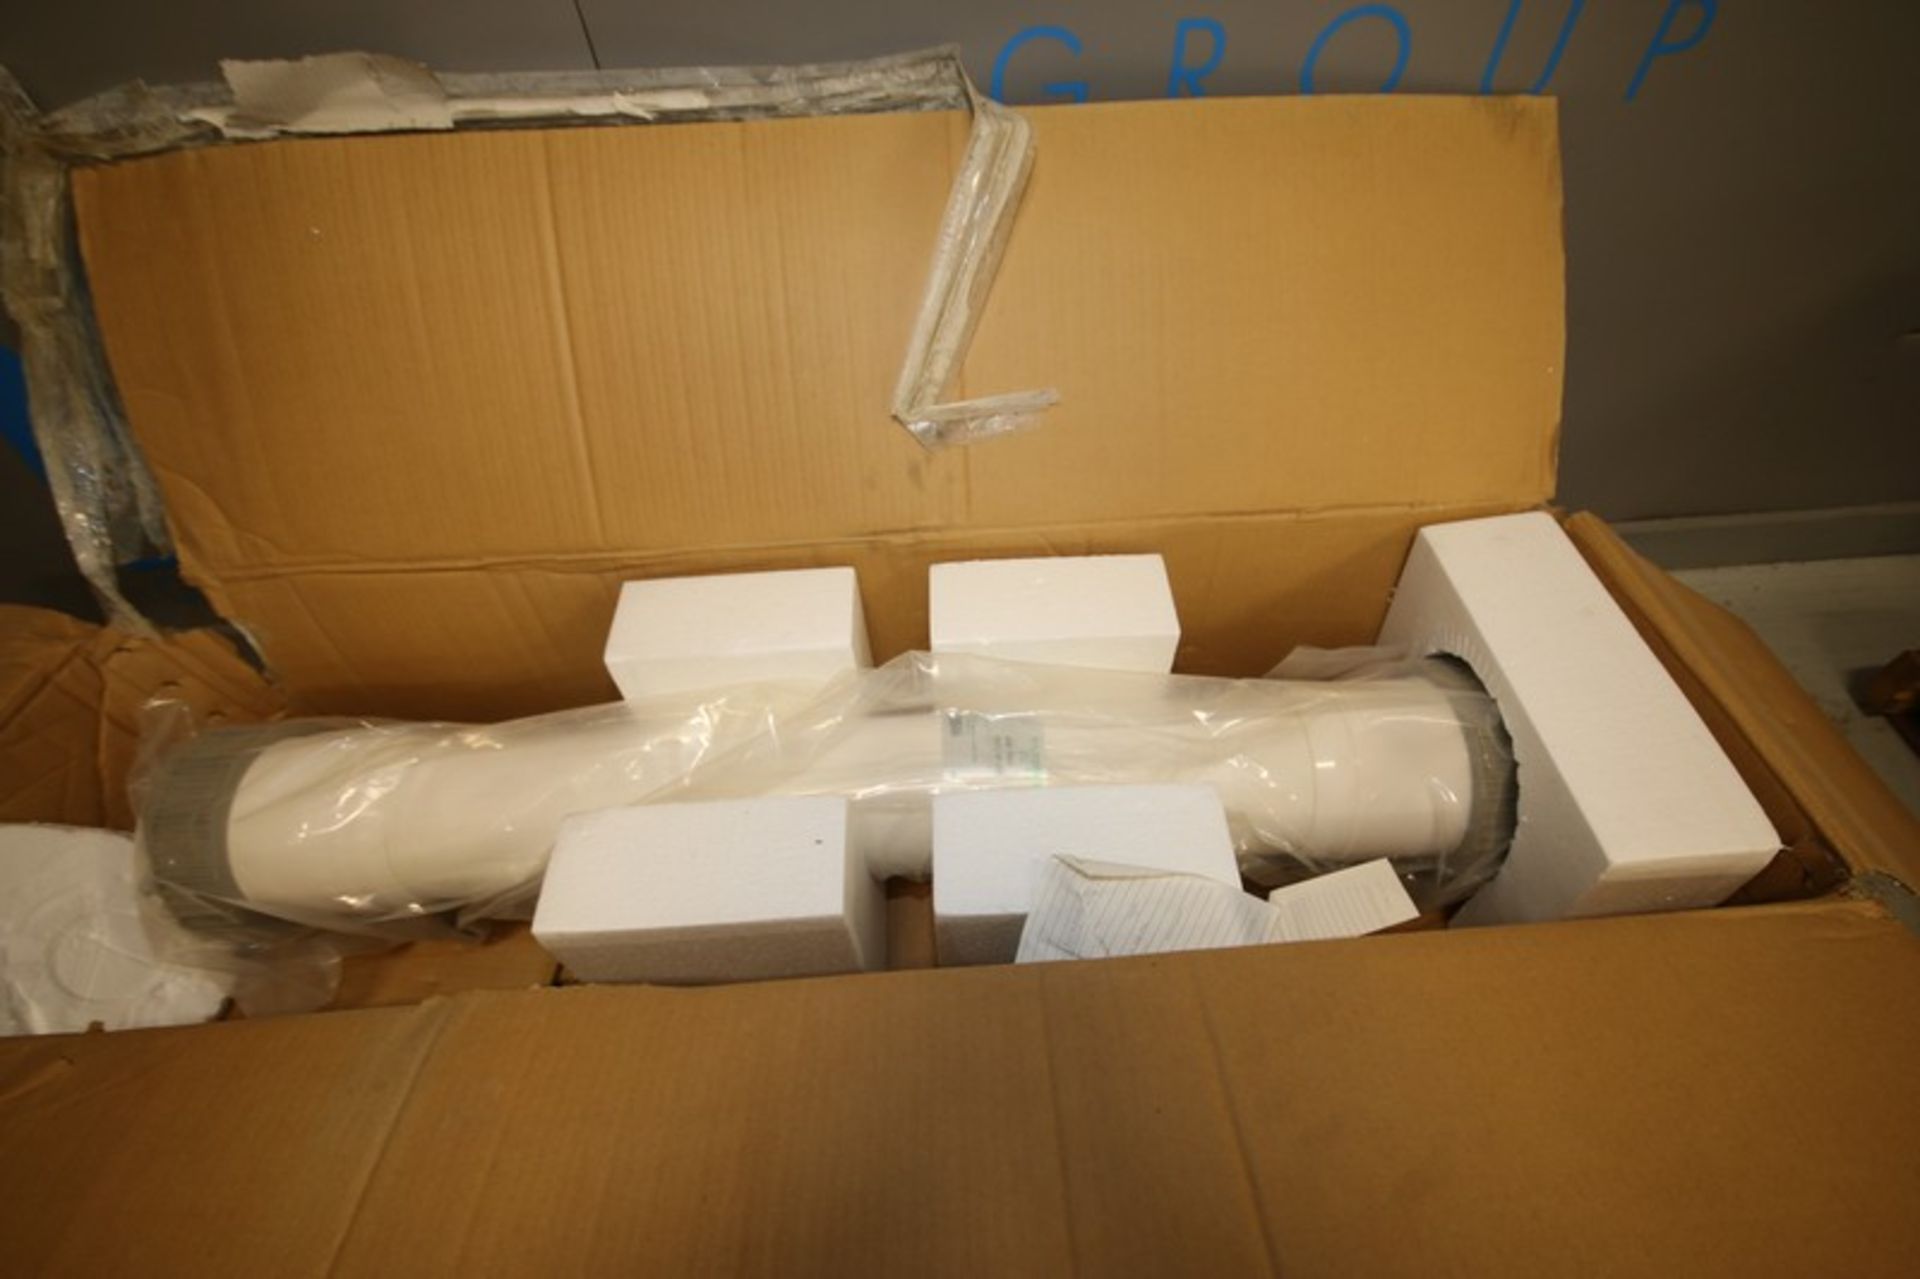 Lot of (2) Pall Microza Membranes, Part No. UMW-553 & WSP-543, 44" L with 3.5" Clamp Type Connection - Image 3 of 3